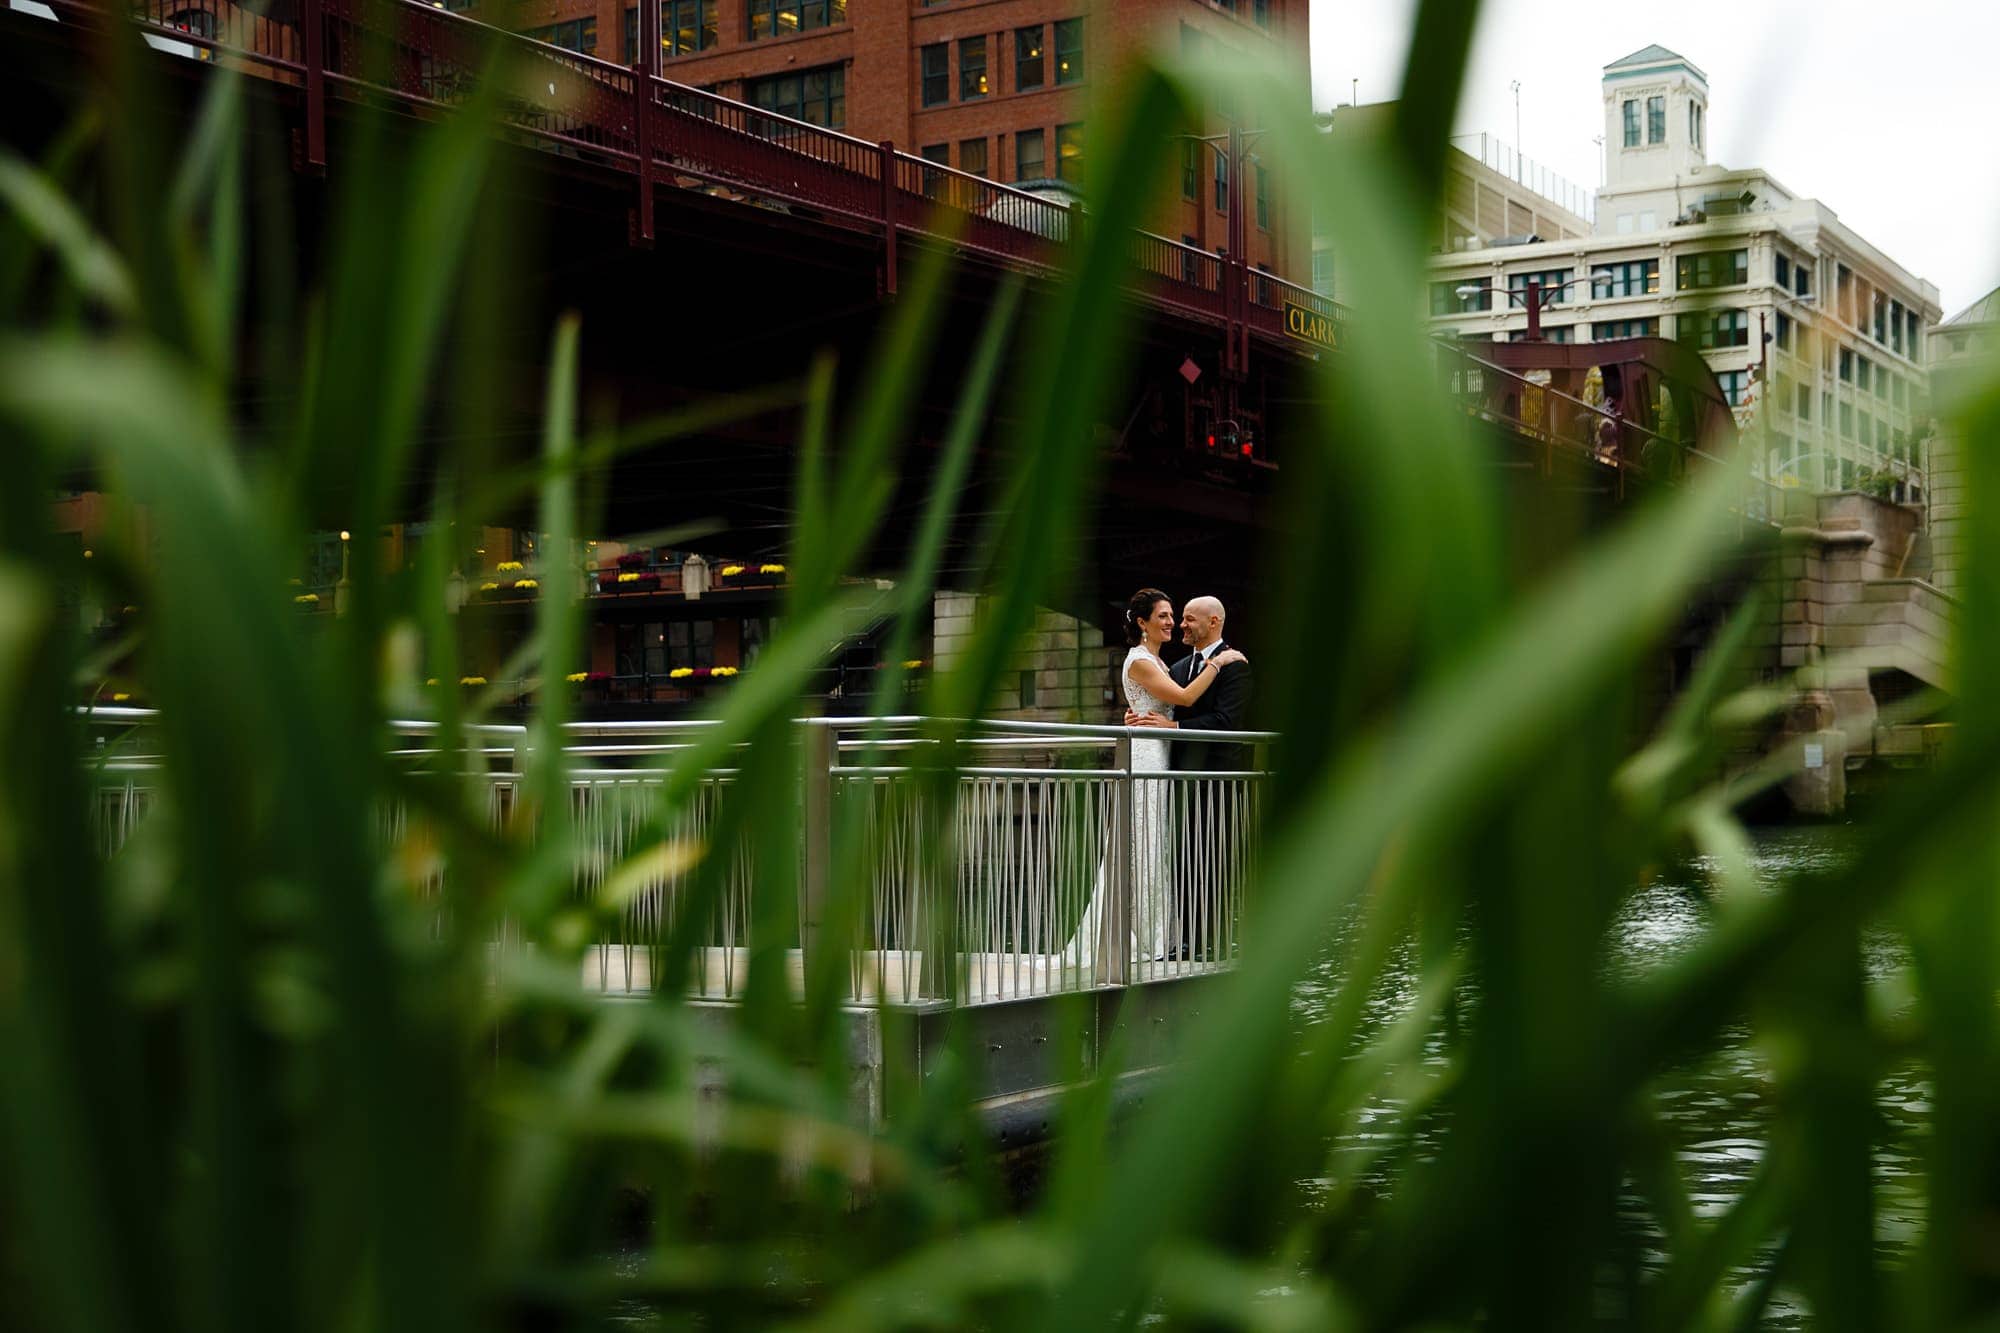 Christina and Brad share a moment together on their wedding day on the river walk under the Clark Street bridge